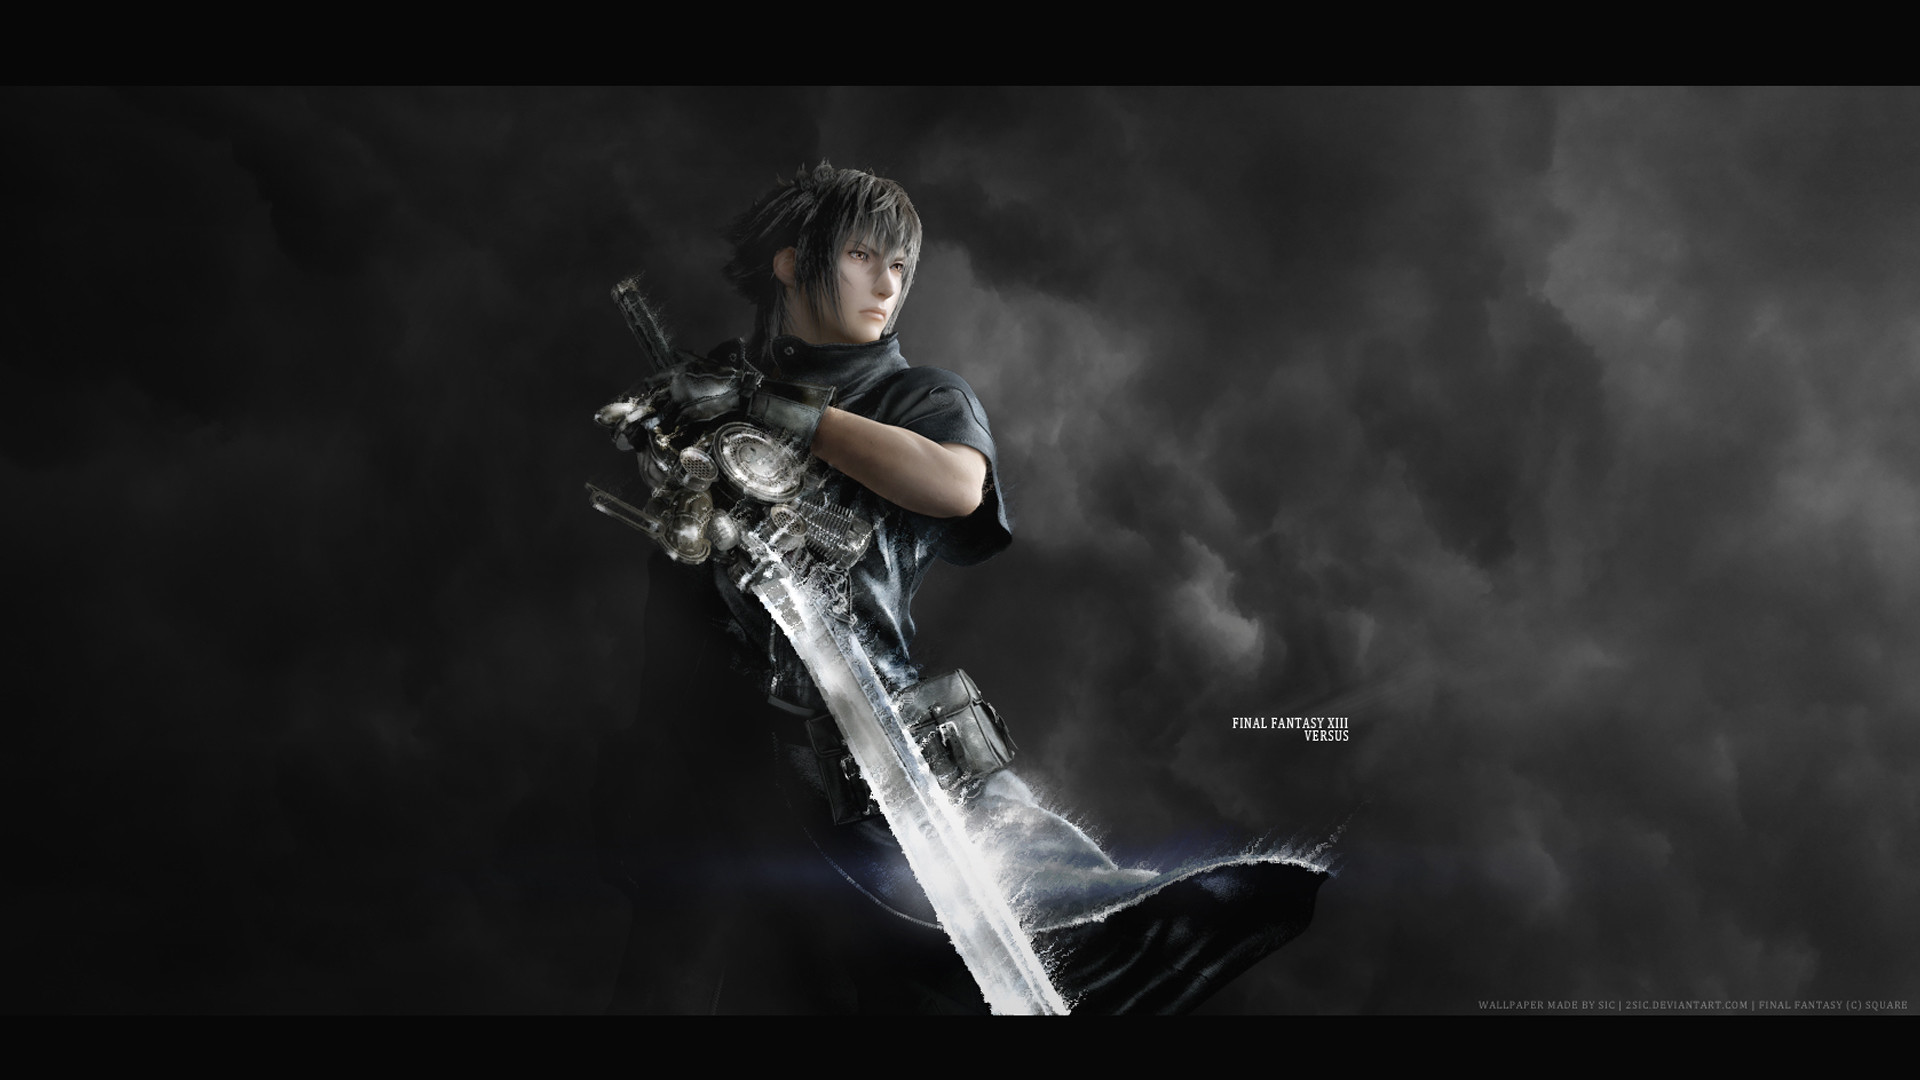 1920x1080 Final Fantasy xv wallpapers and images - wallpapers, pictures, photos .